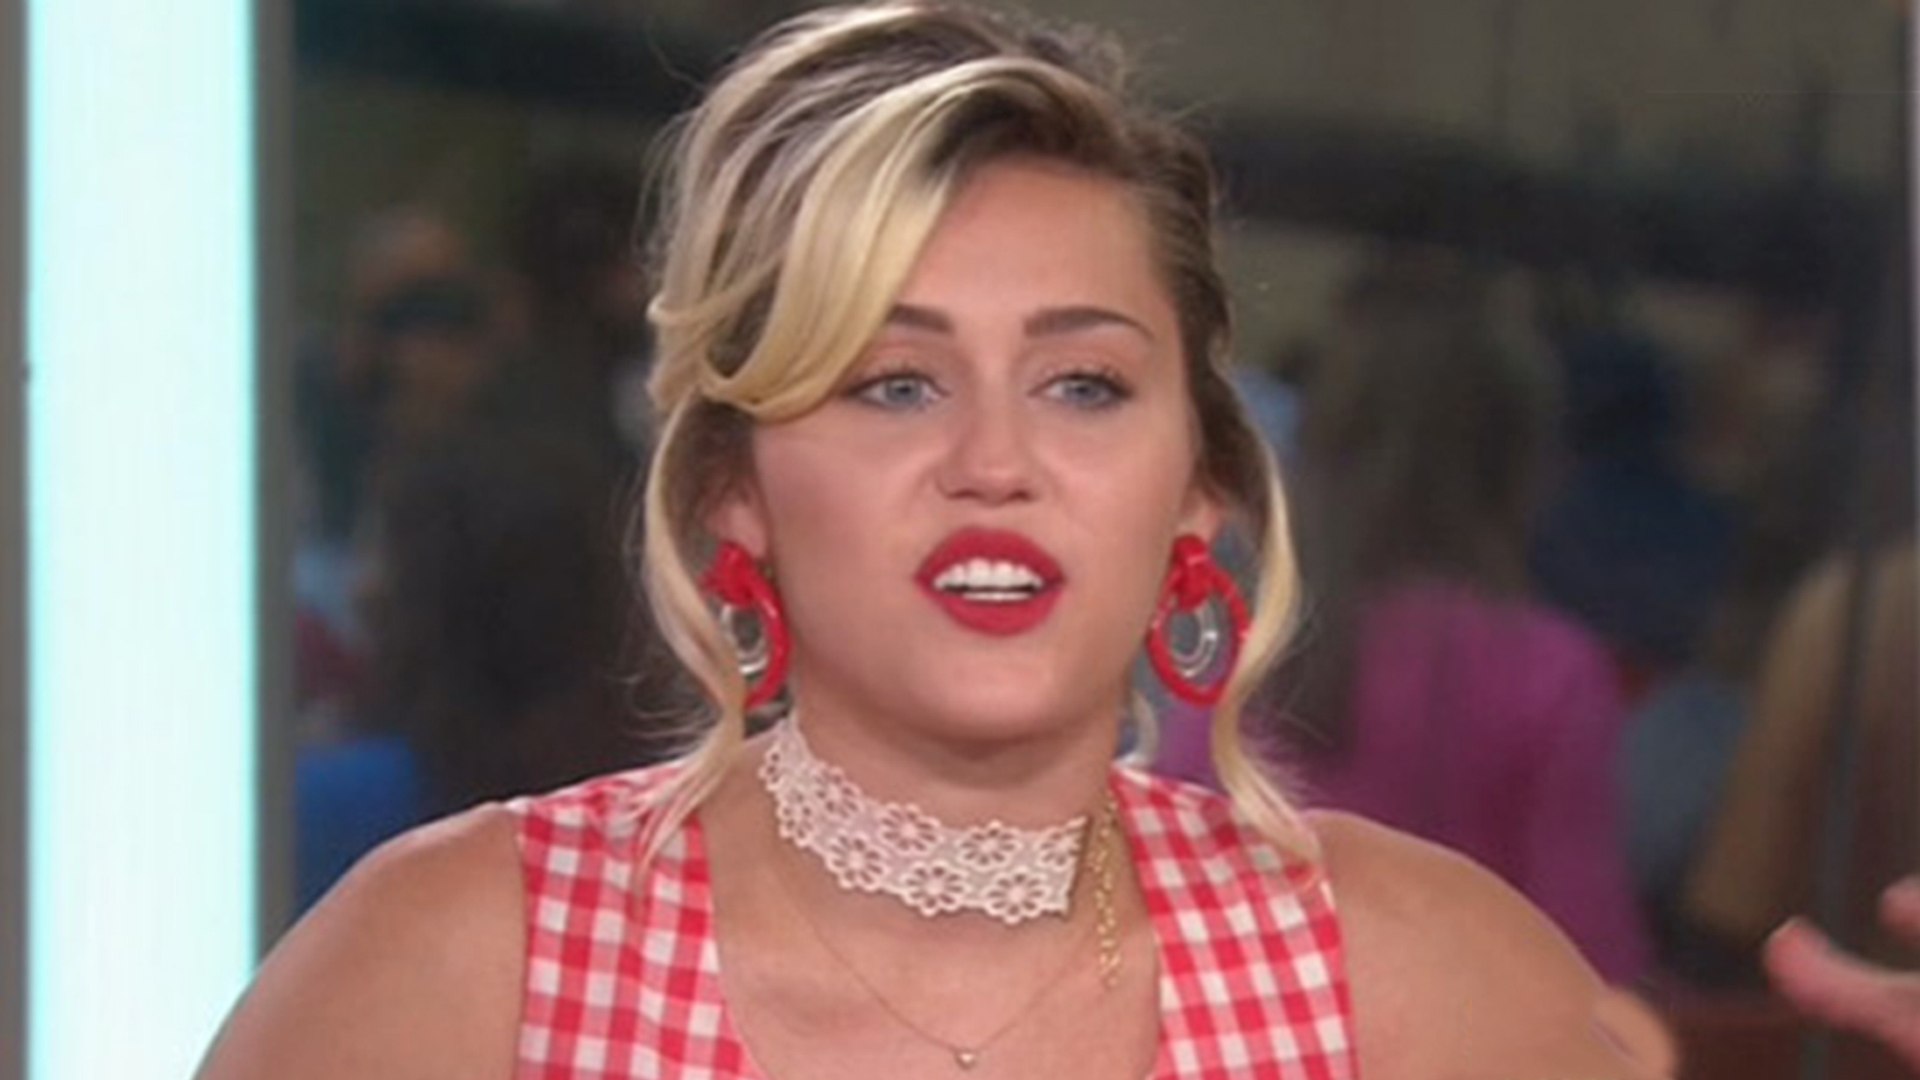 Miley Cyrus Says ‘F***’ On Live Television